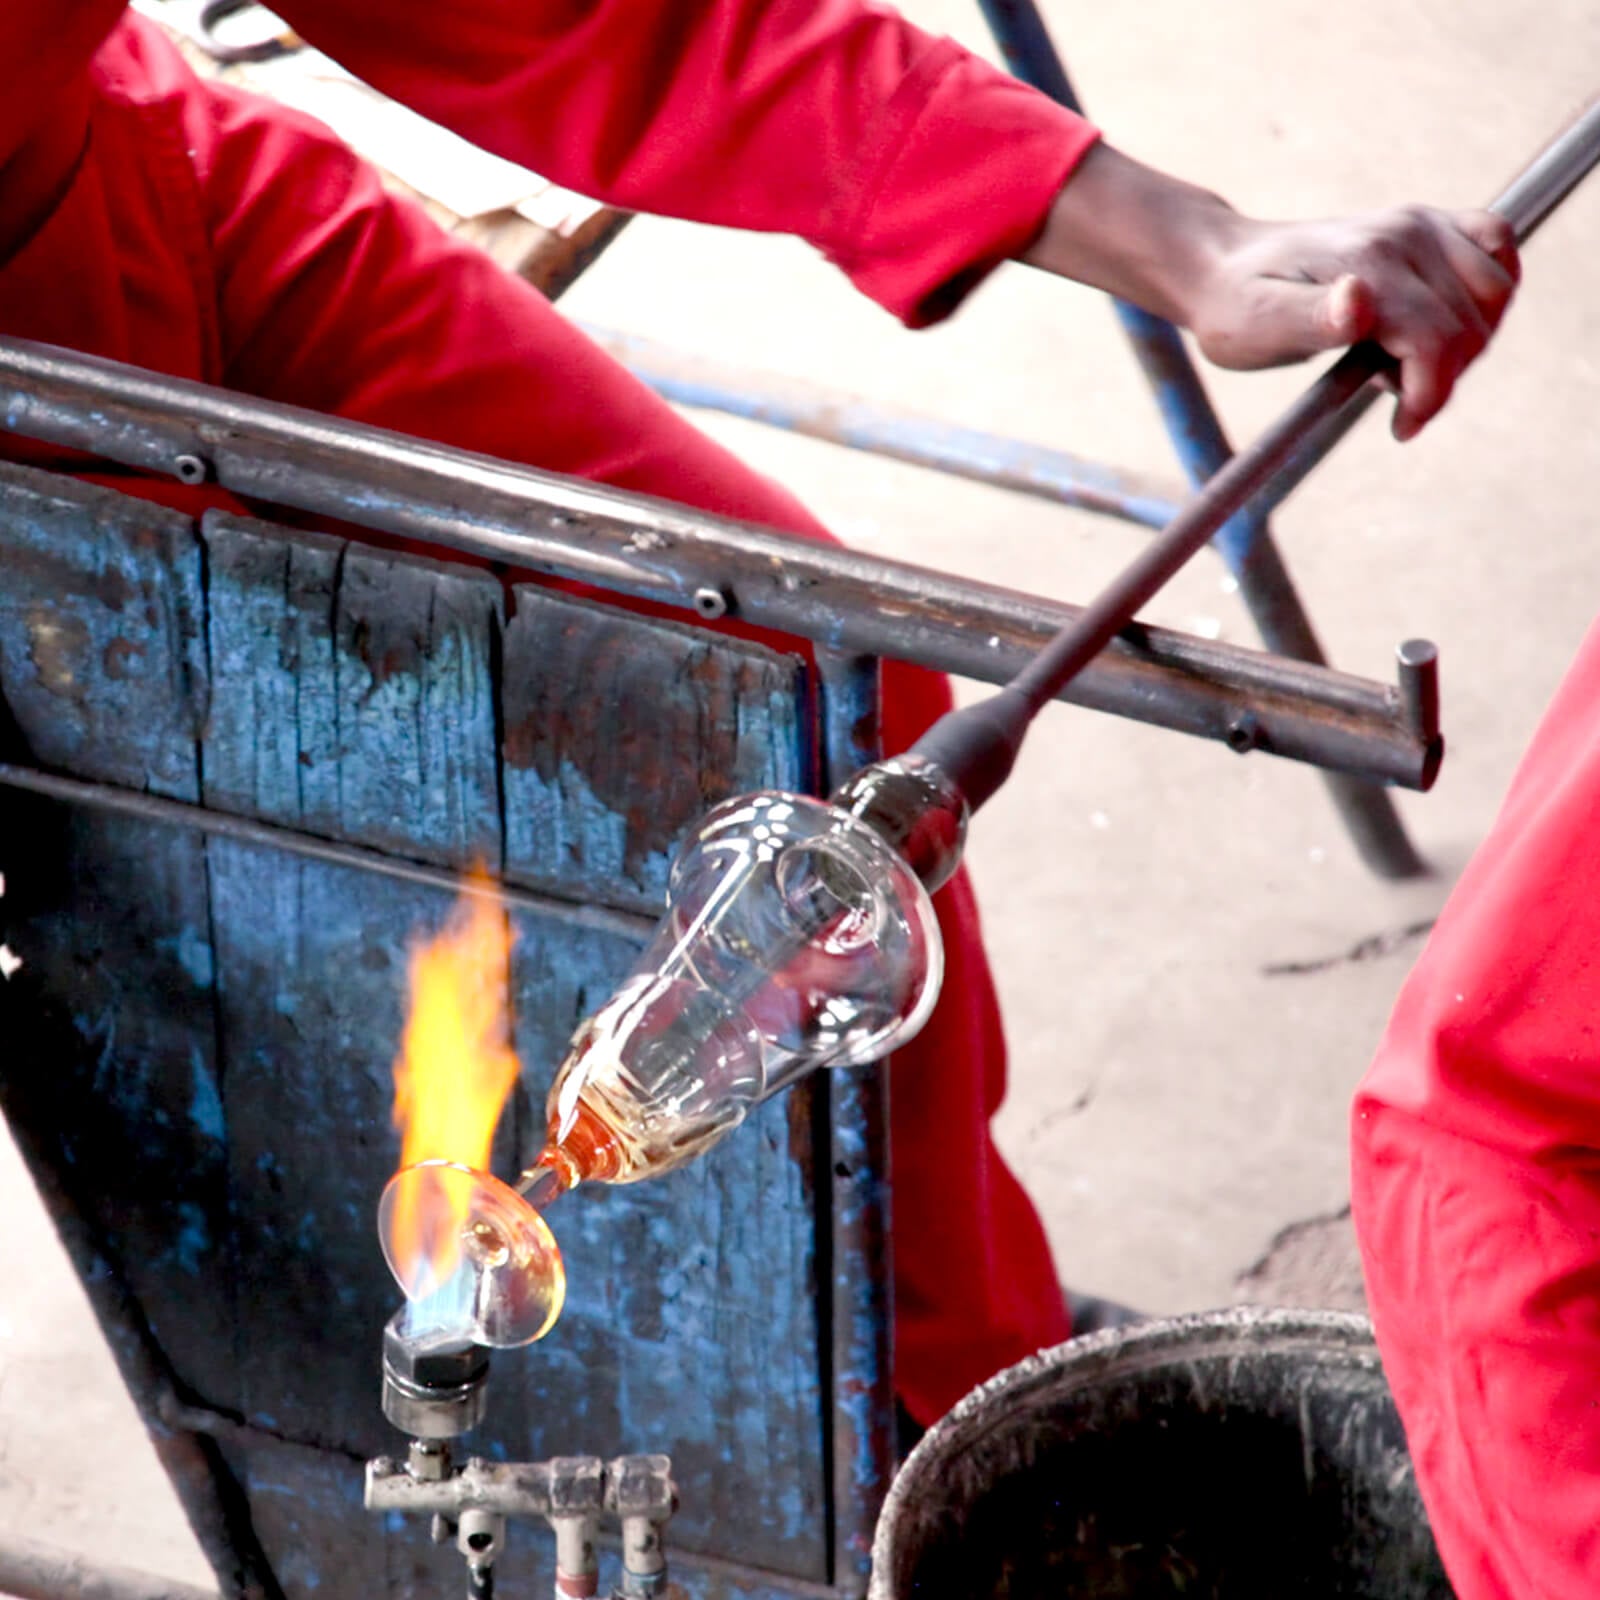 Recycled glass being made by Ngwenya glass in Swaziland 